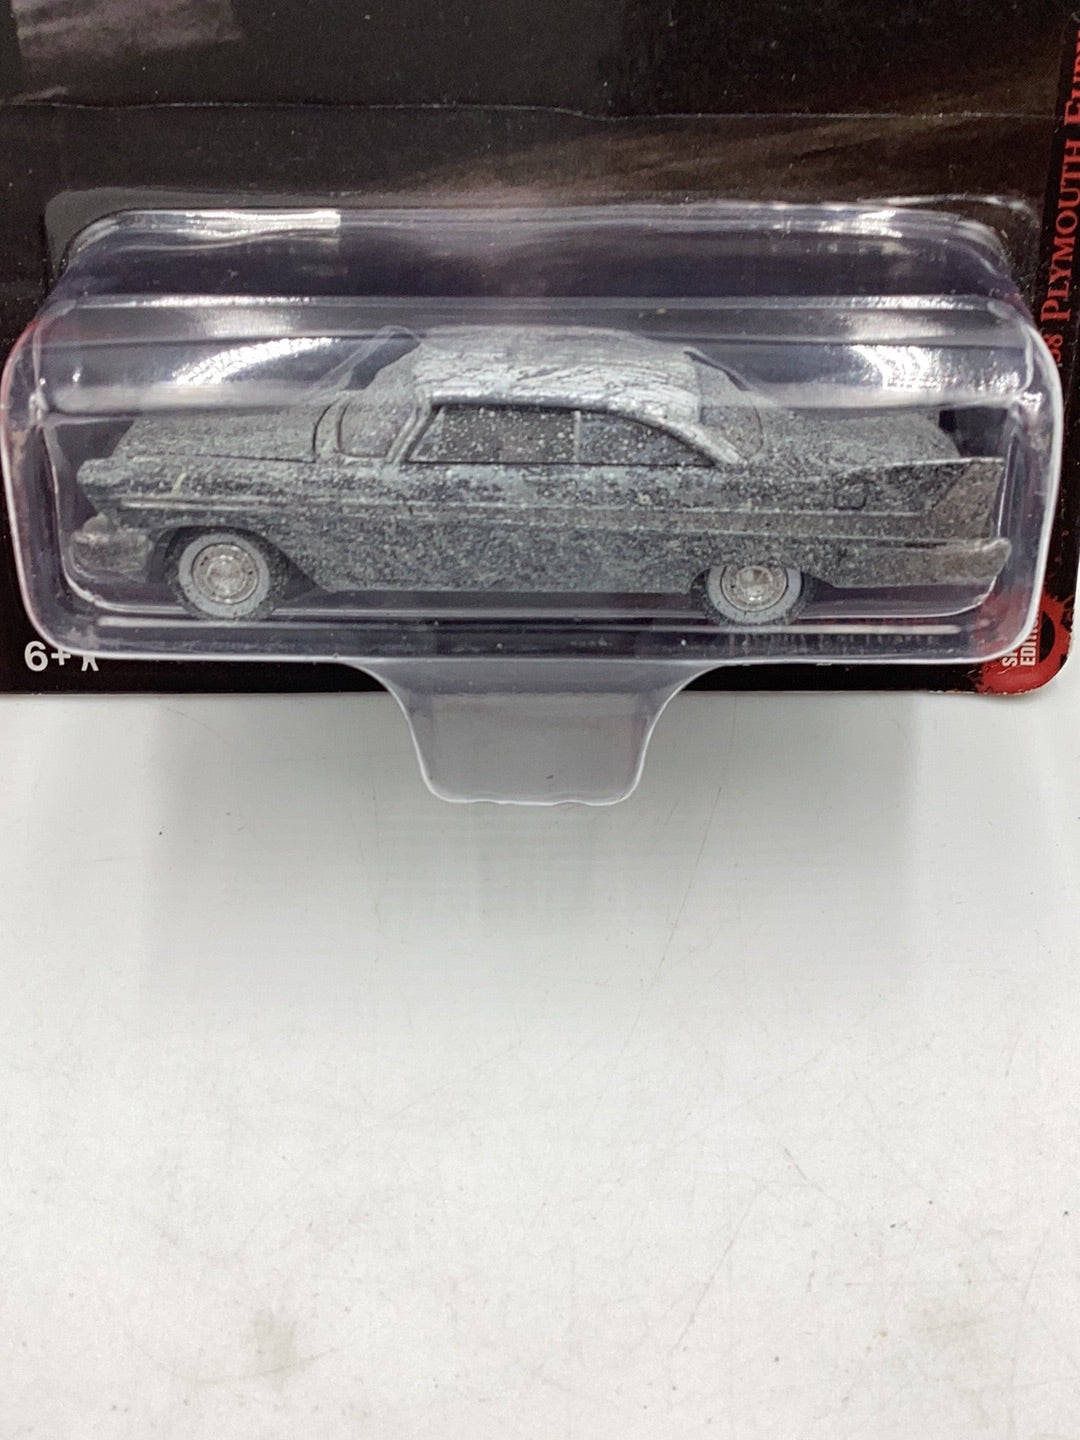 Auto world Christine an evil burnt 1958 Plymouth Fury hobby exclusive